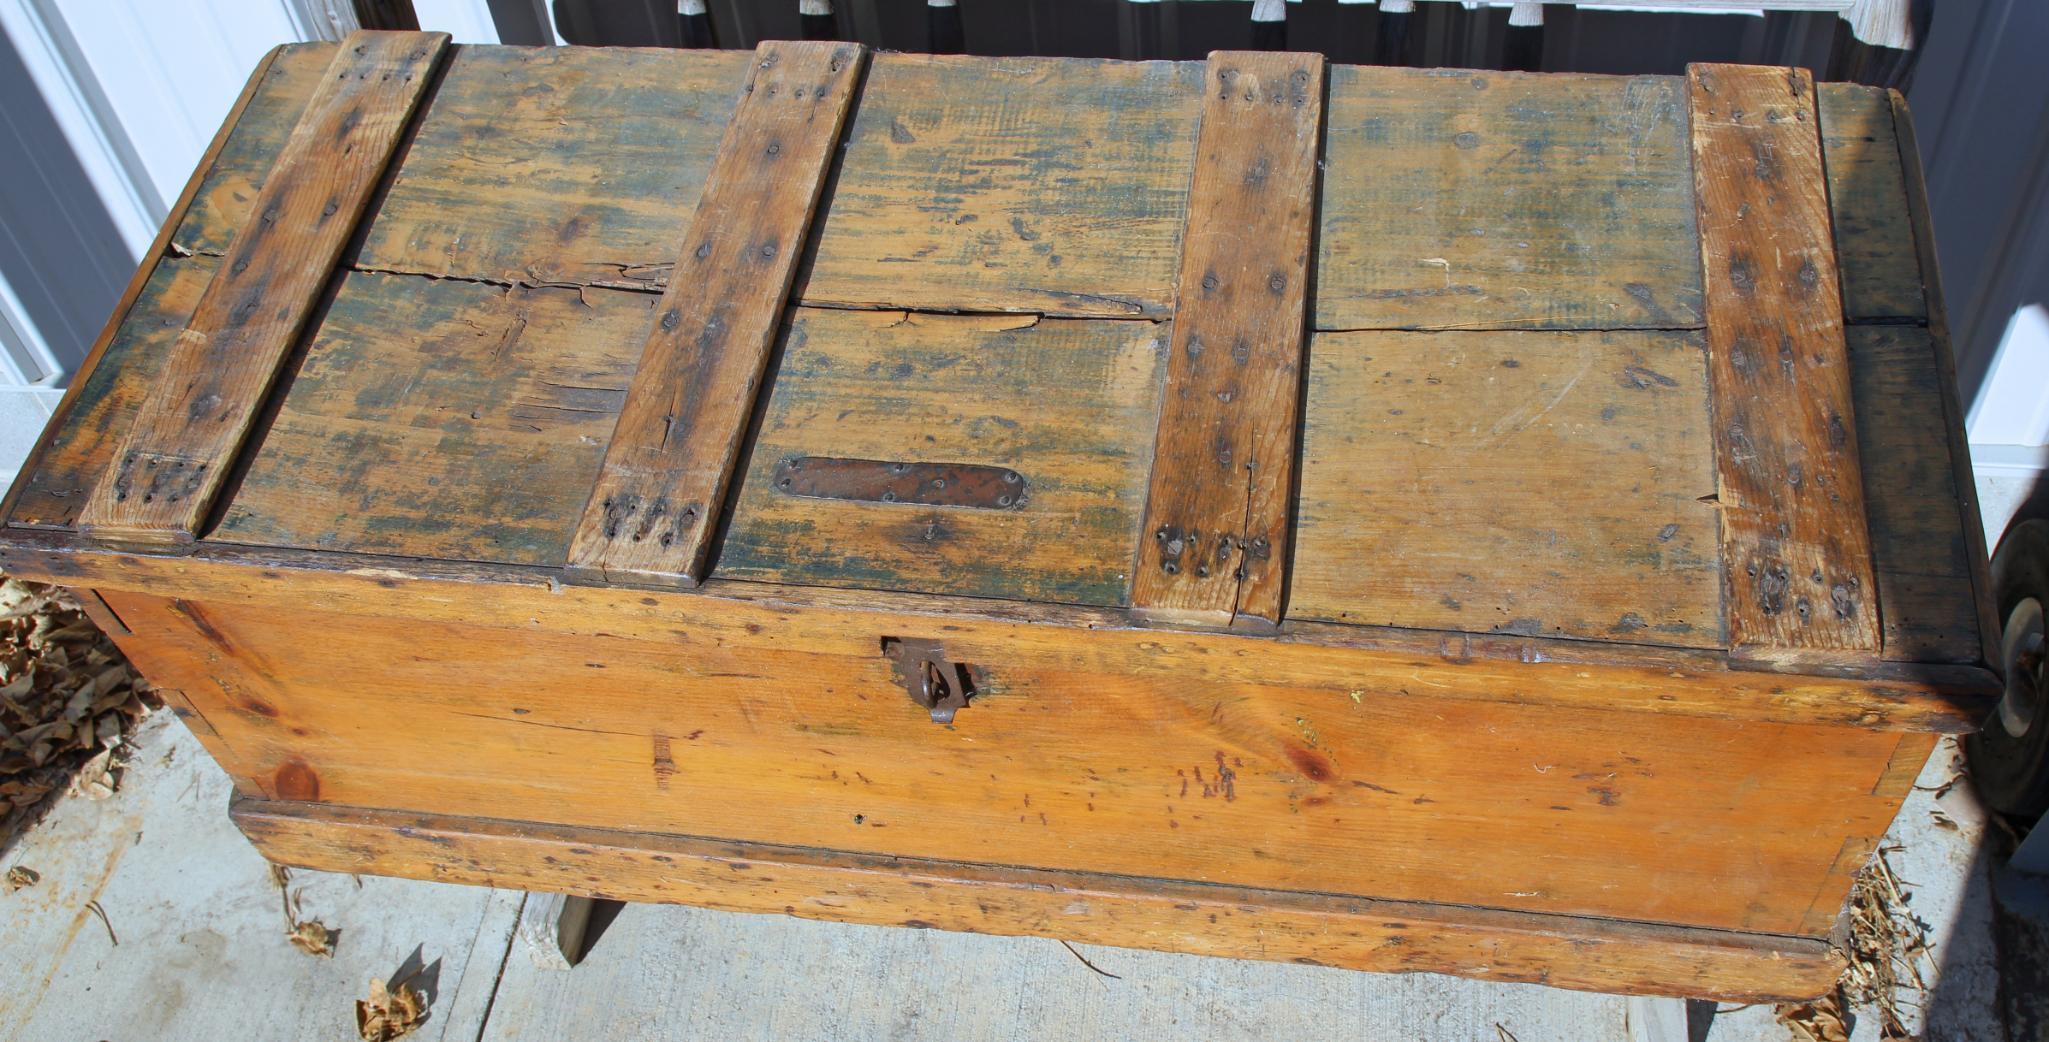 Vintage Tools Old Carpenter's Woodworking Tool Chest with Some Early Tools - LOCAL PICKUP ONLY---We